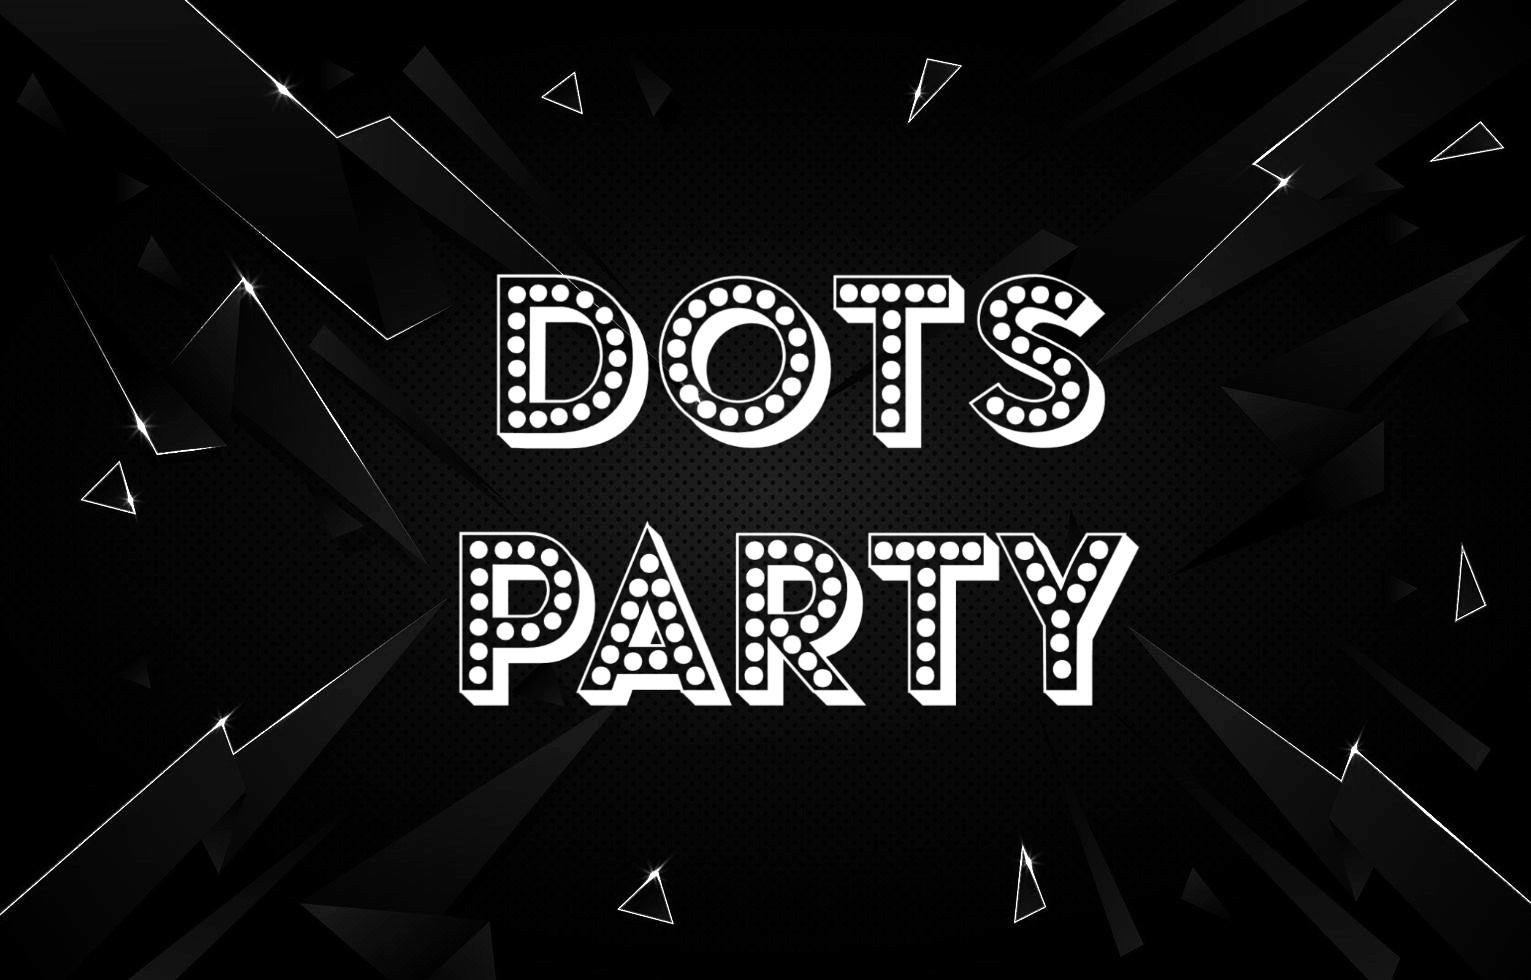 Dots Party